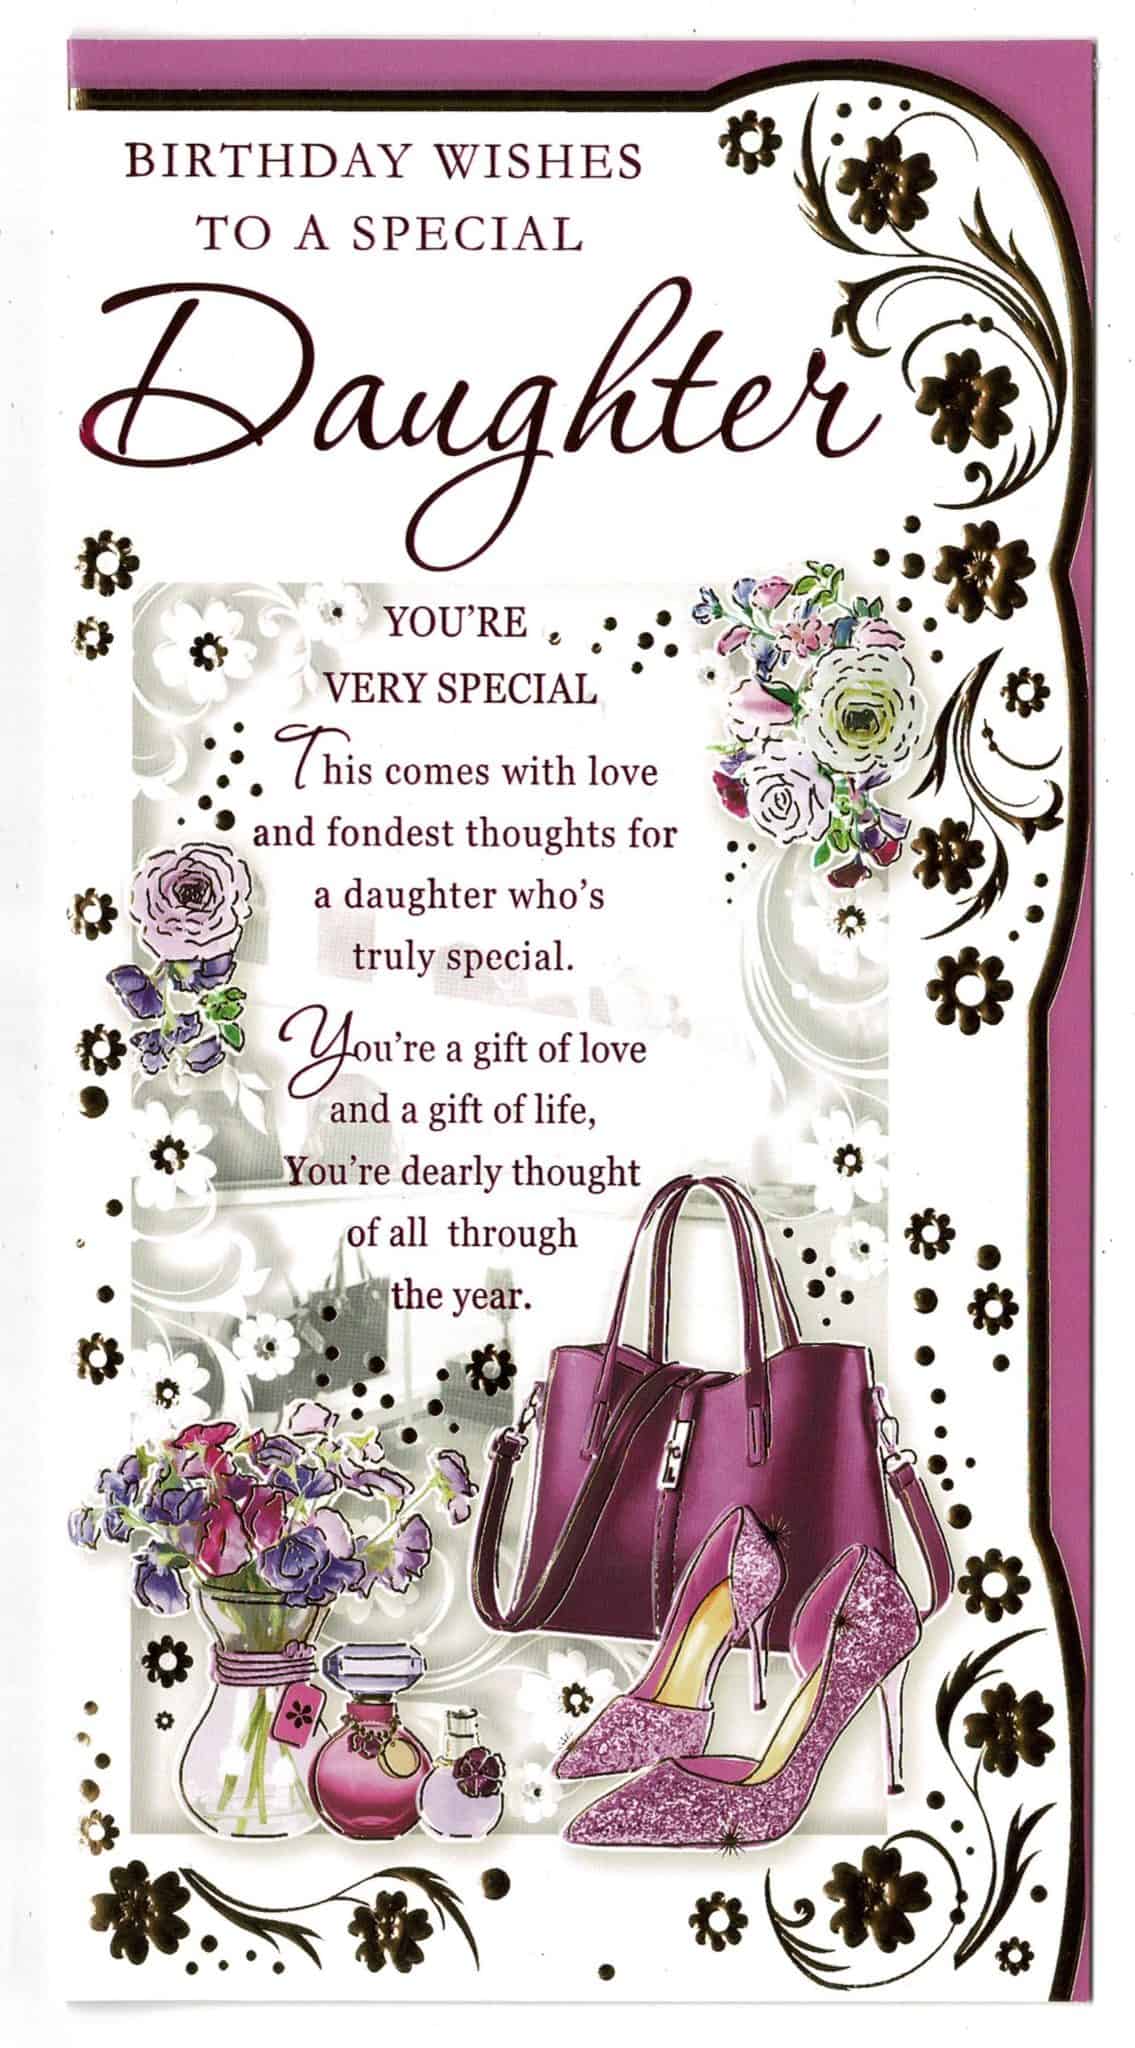 Daughter Birthday Card With Sentiment Verse Birthday Wishes To A Special Daughter With Love